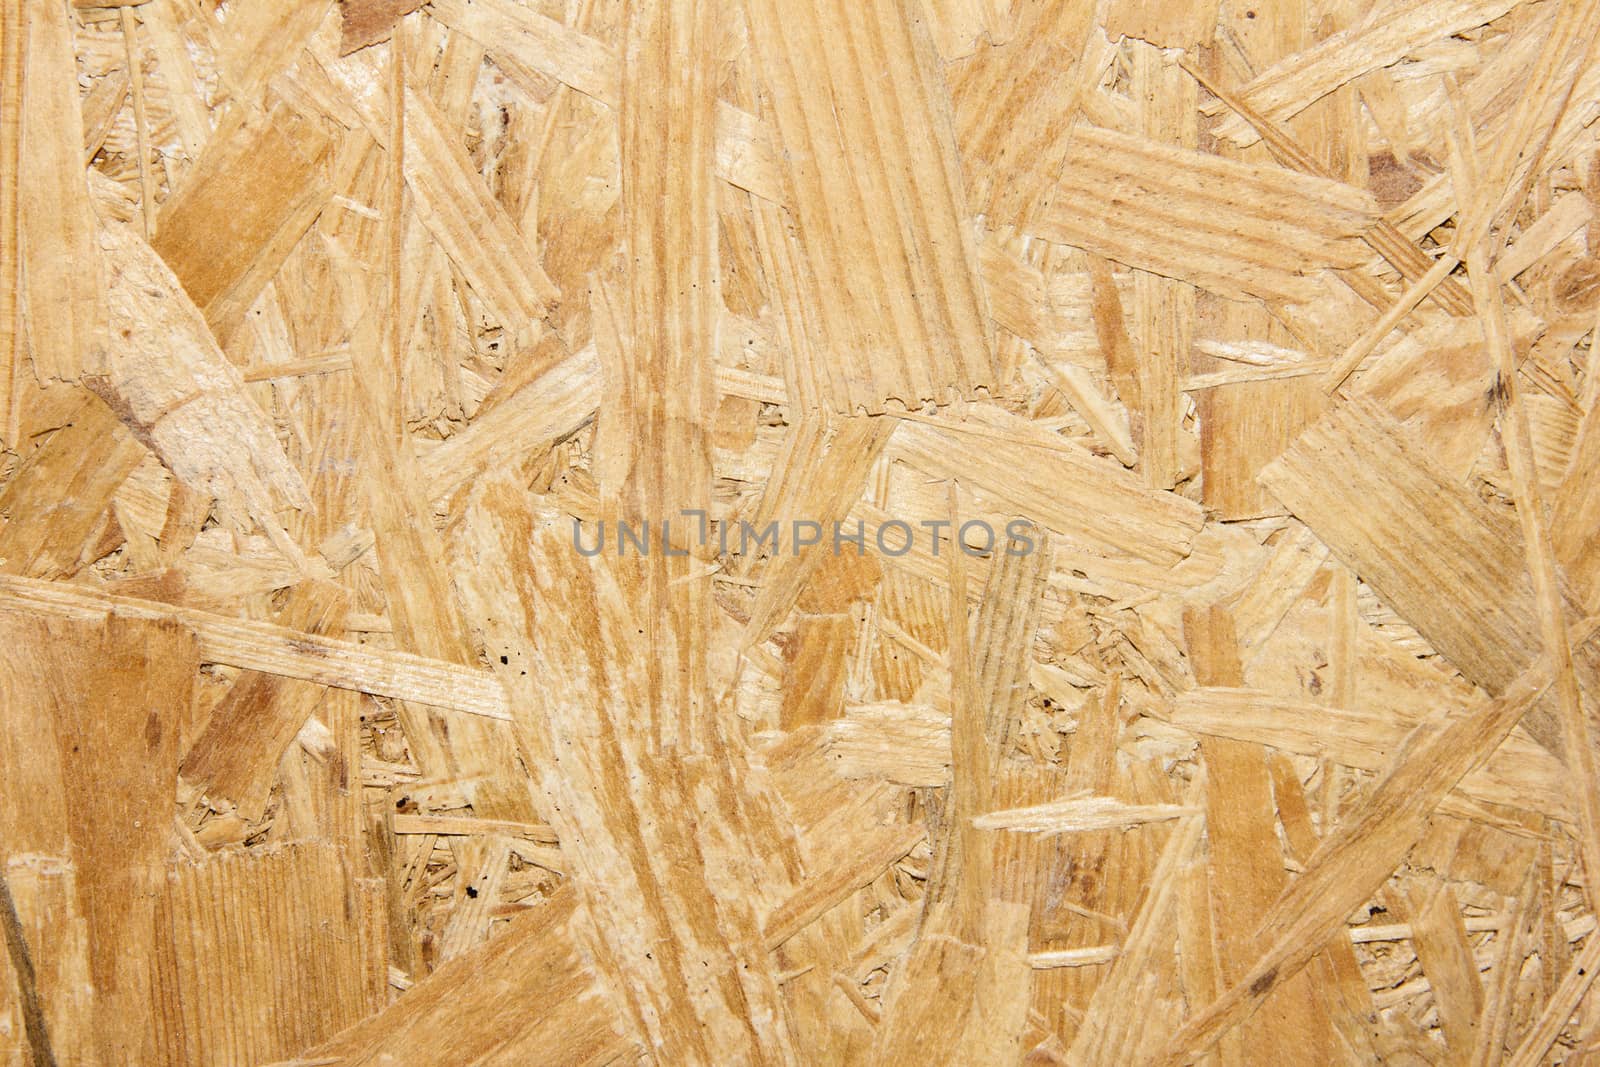 Pressed wood structure  for backgrounds and textures